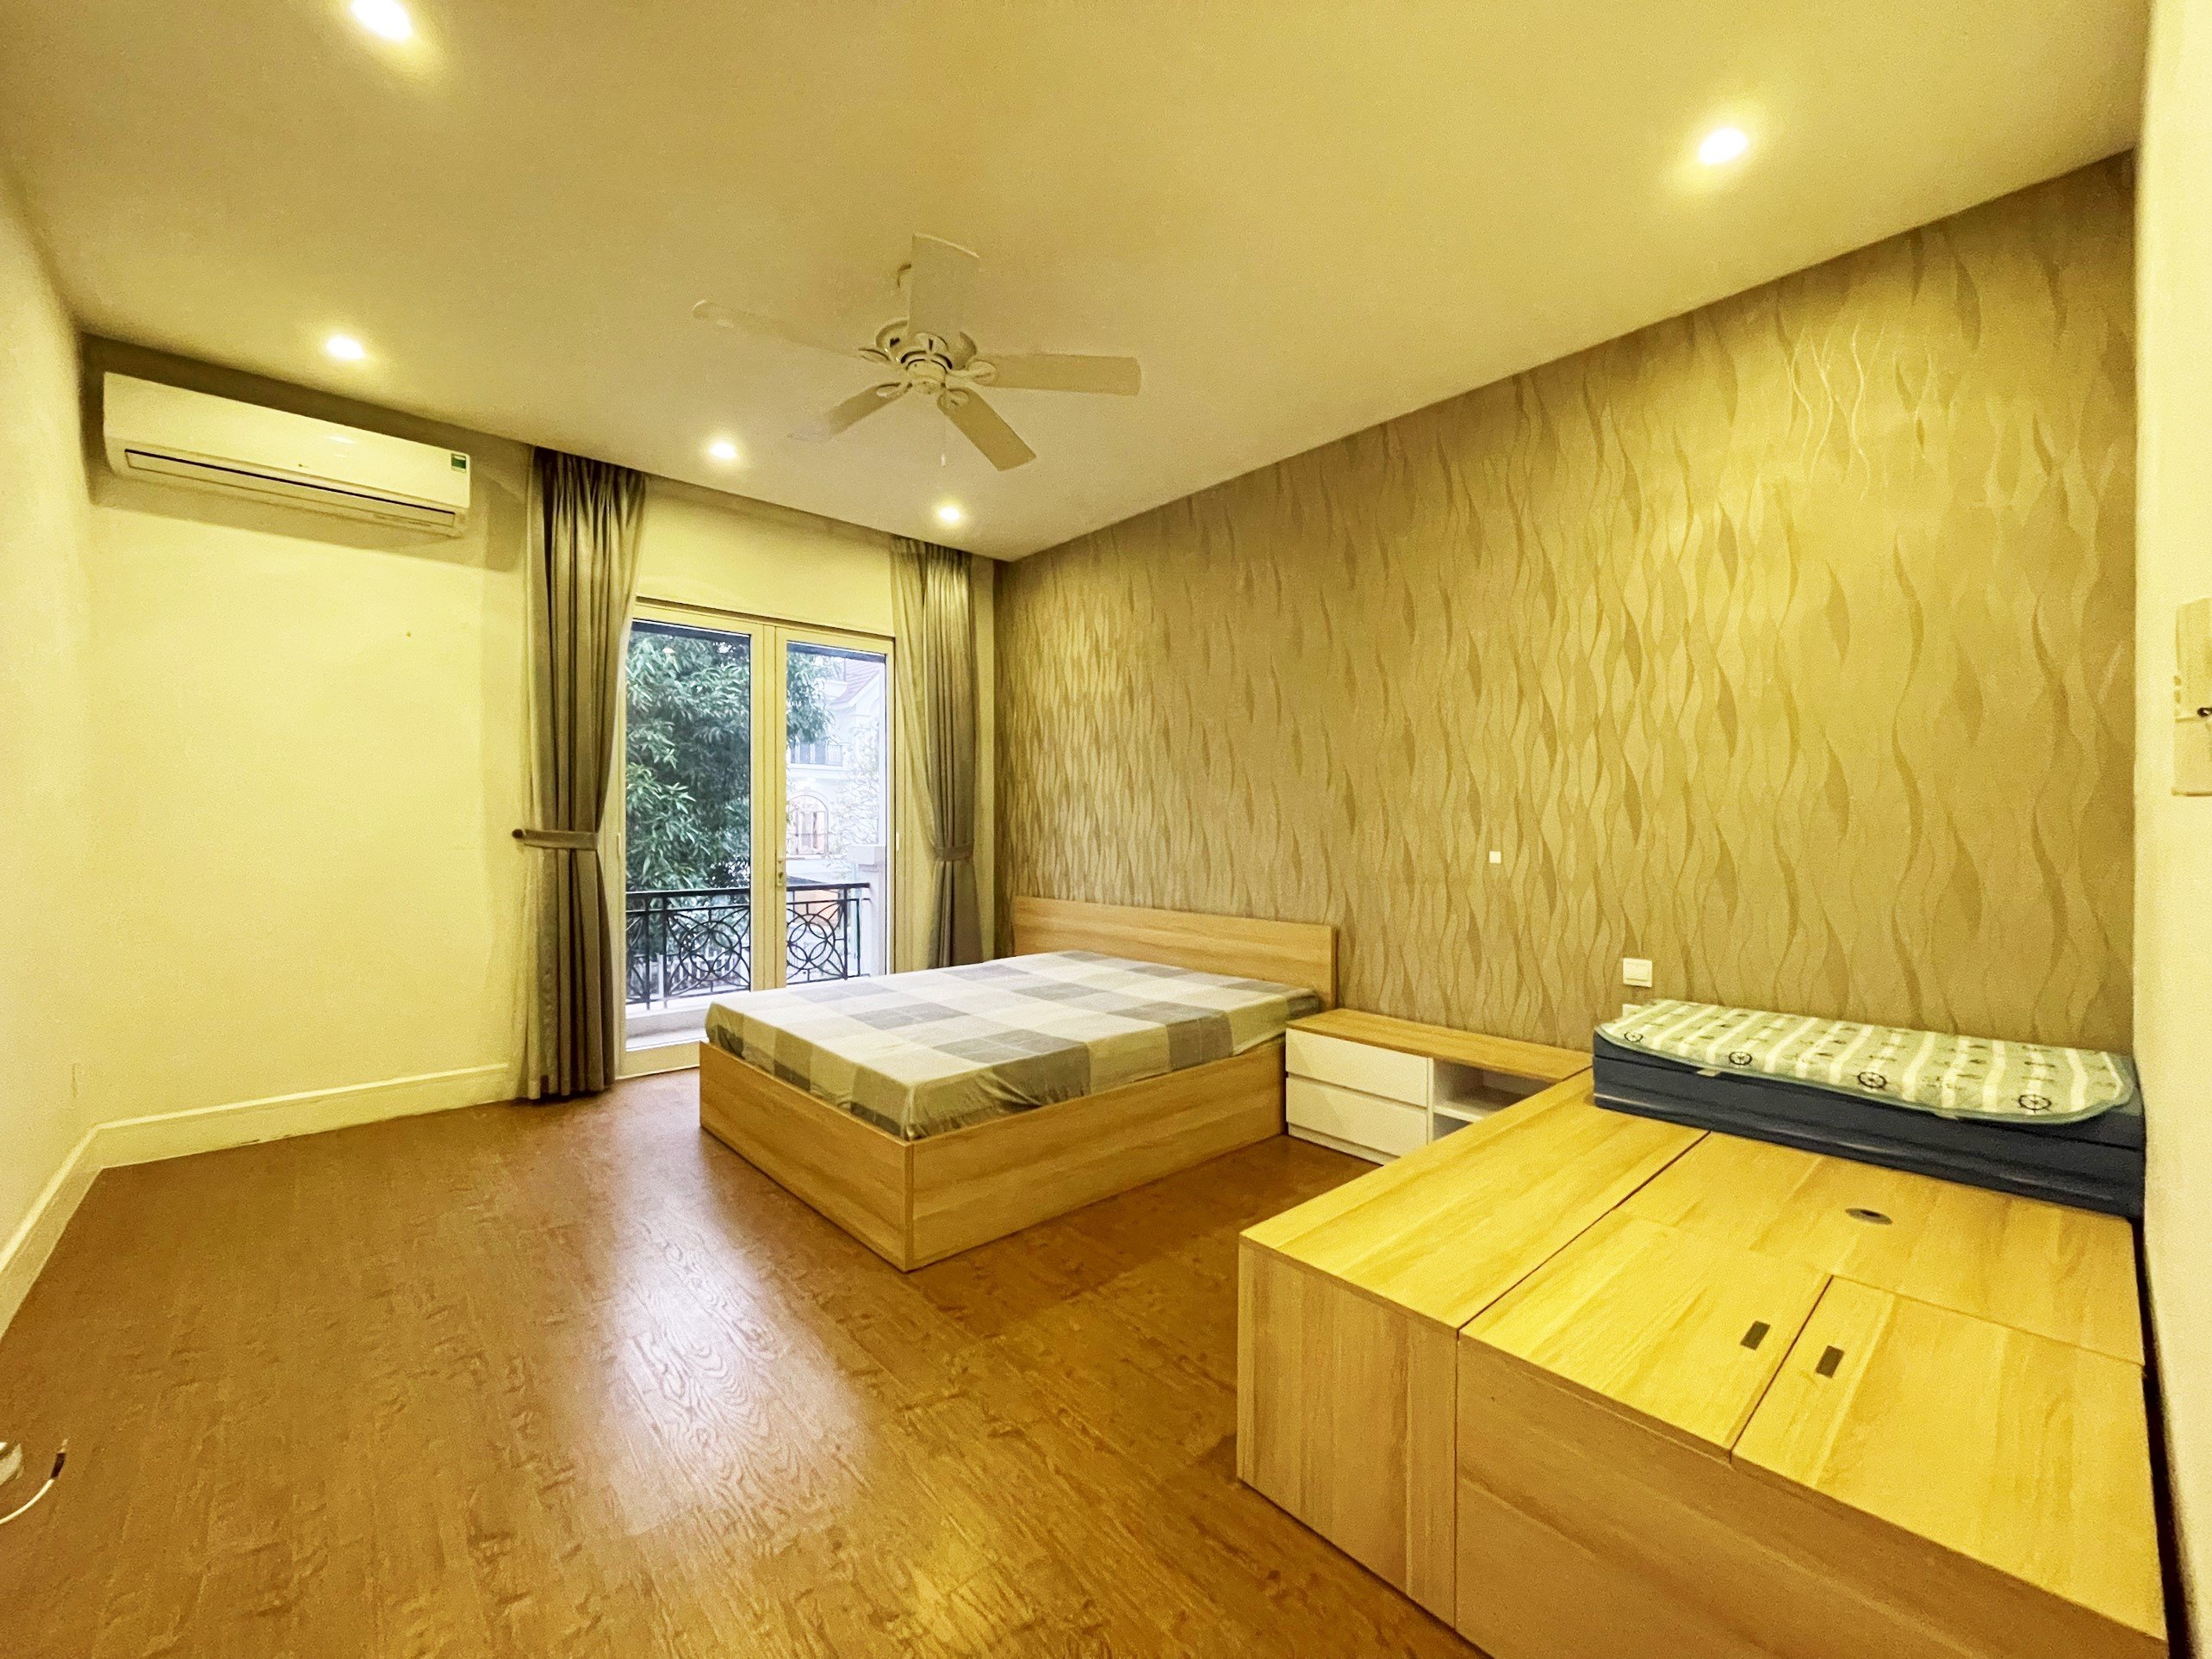 Reasonable Villa in Hoa Sua block, Vinhomes Riverside is Available for Rent now 8